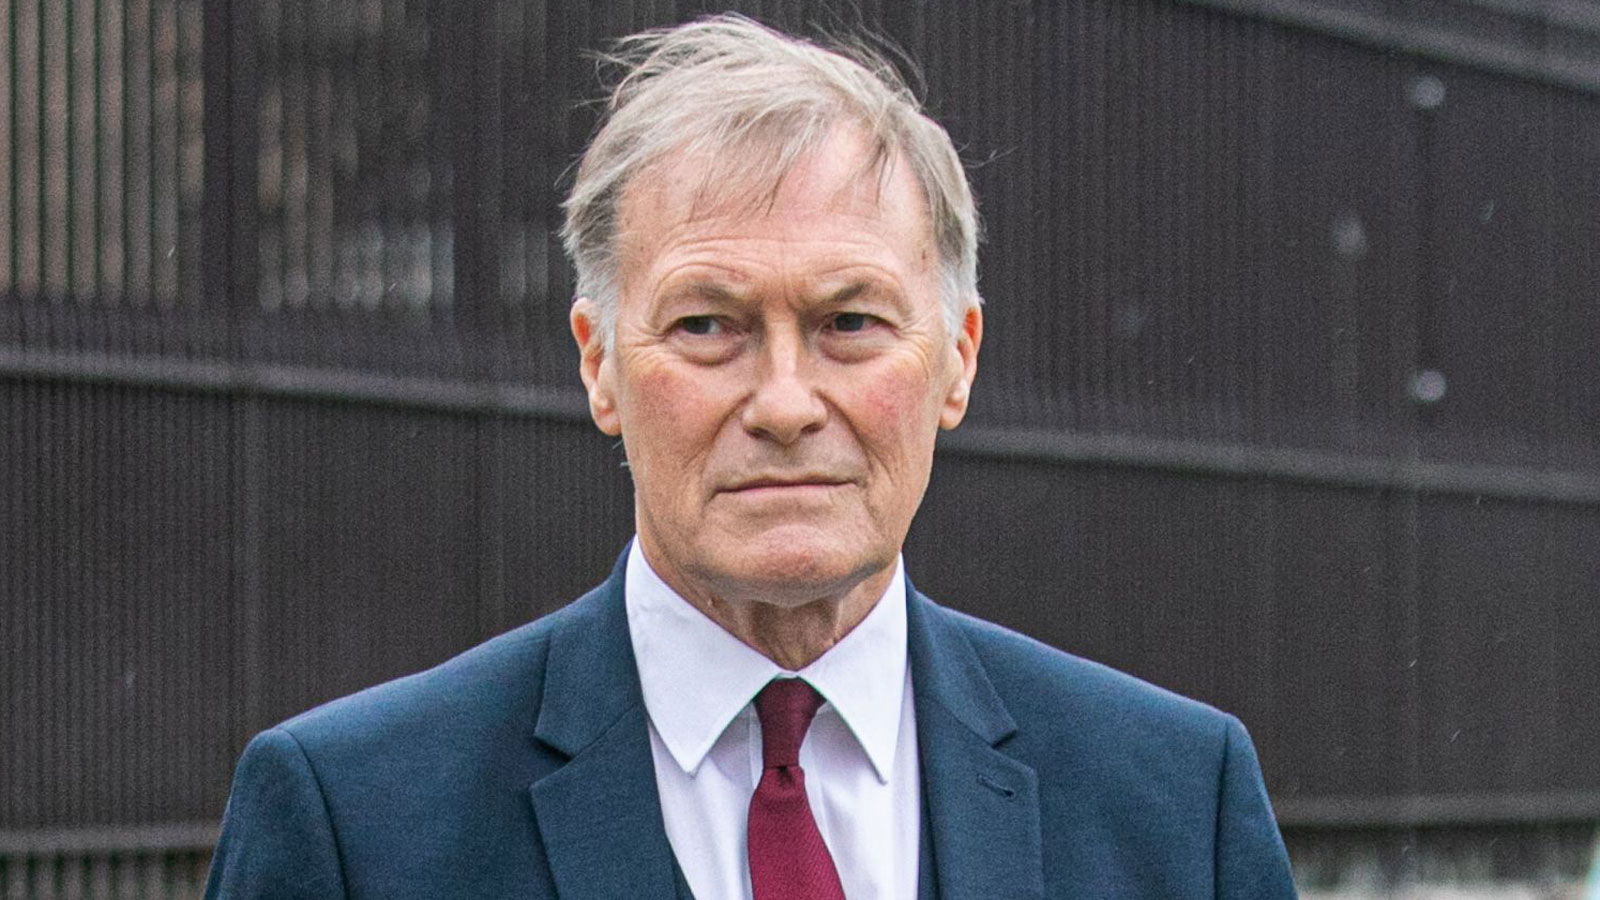 David Amess, seen here in May, was 69 years old.